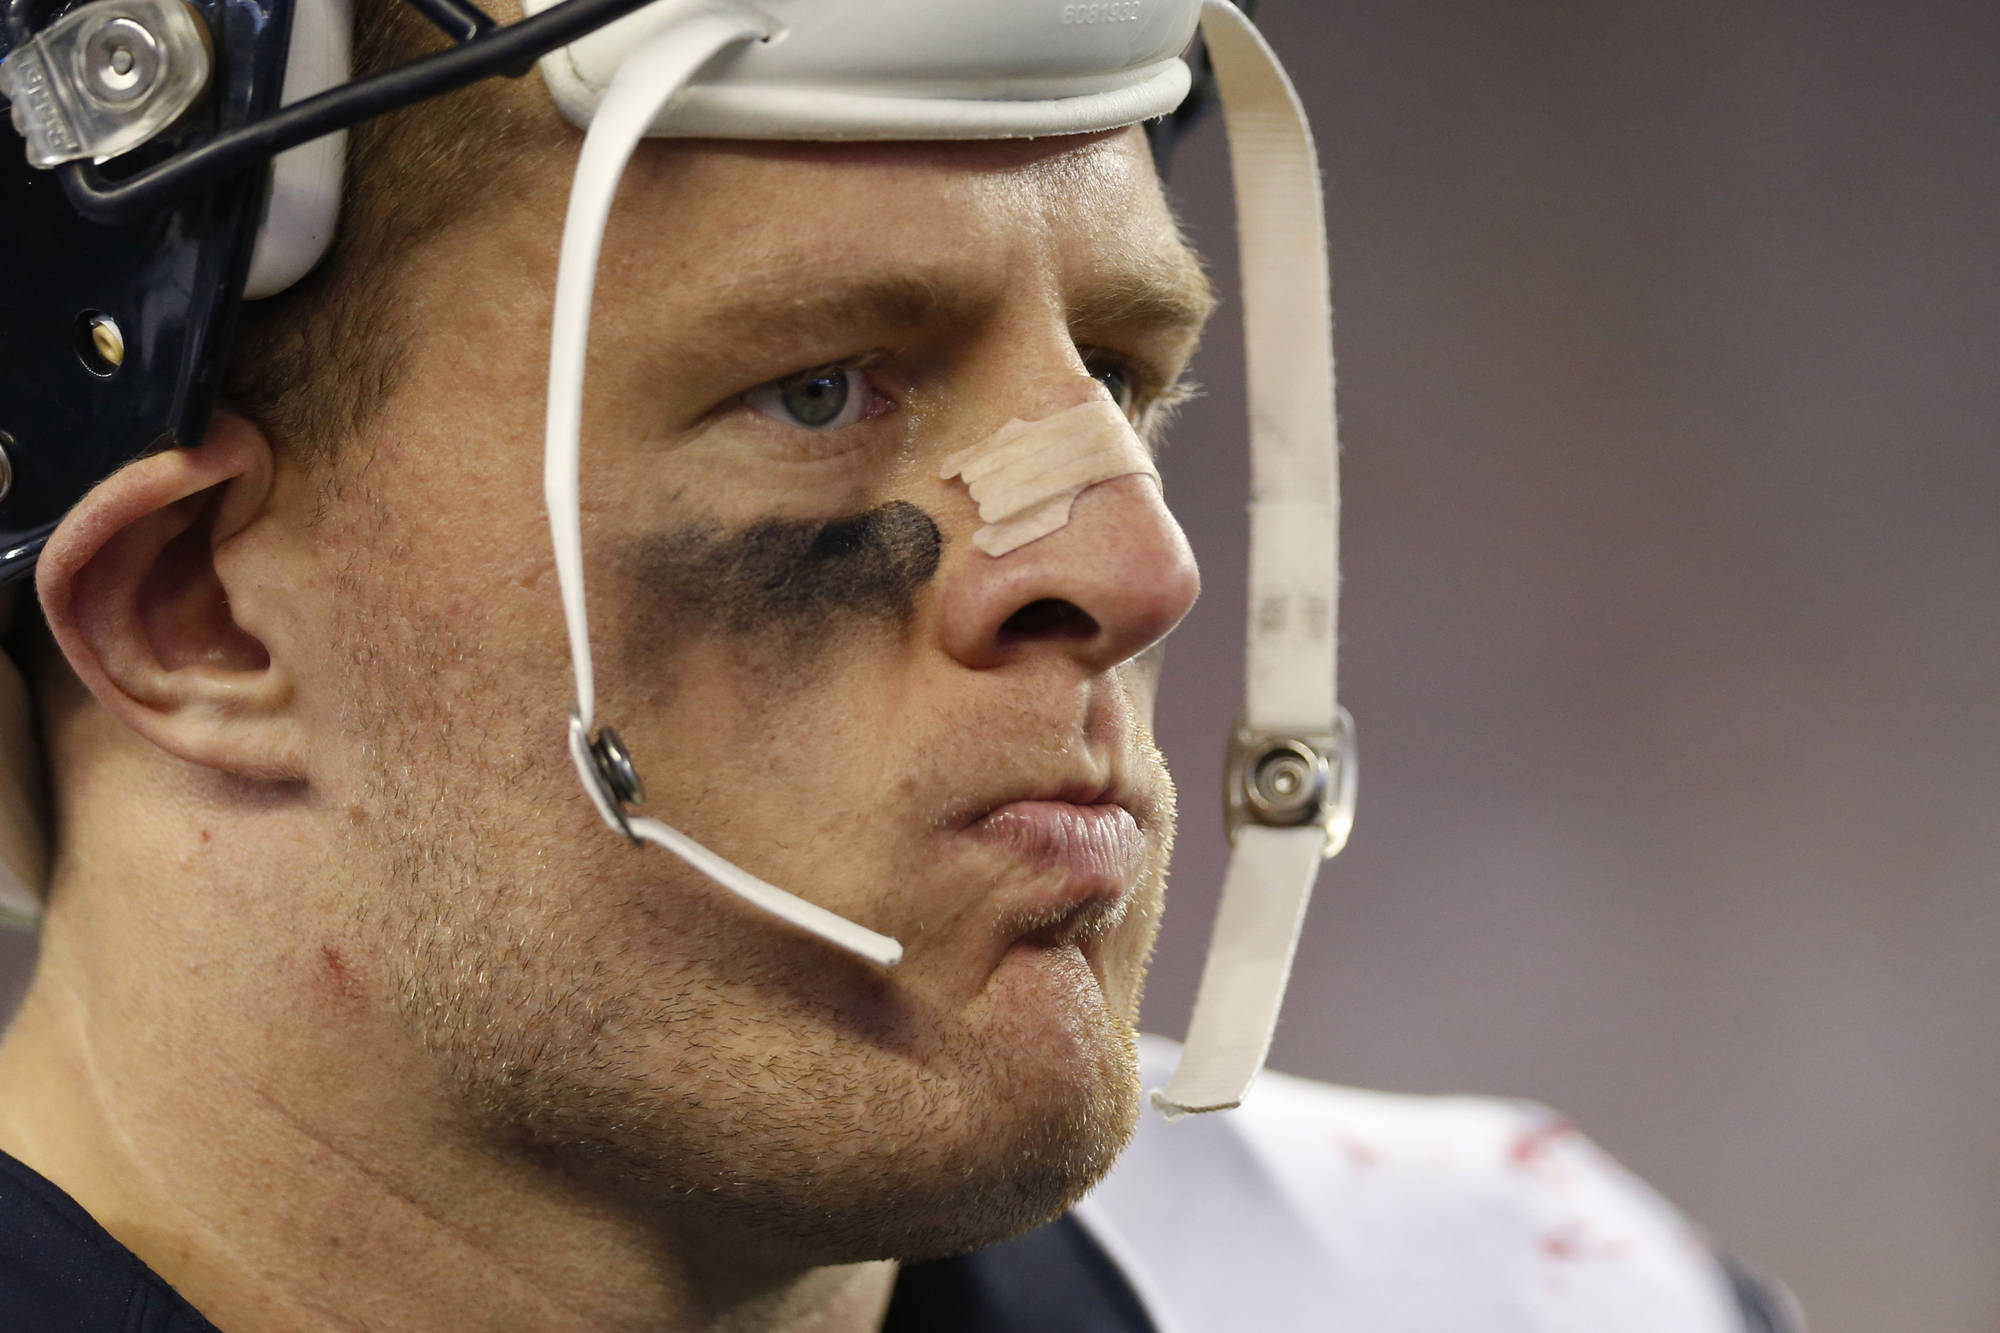 Report: J.J. Watt Could Be Out The Rest Of The Season